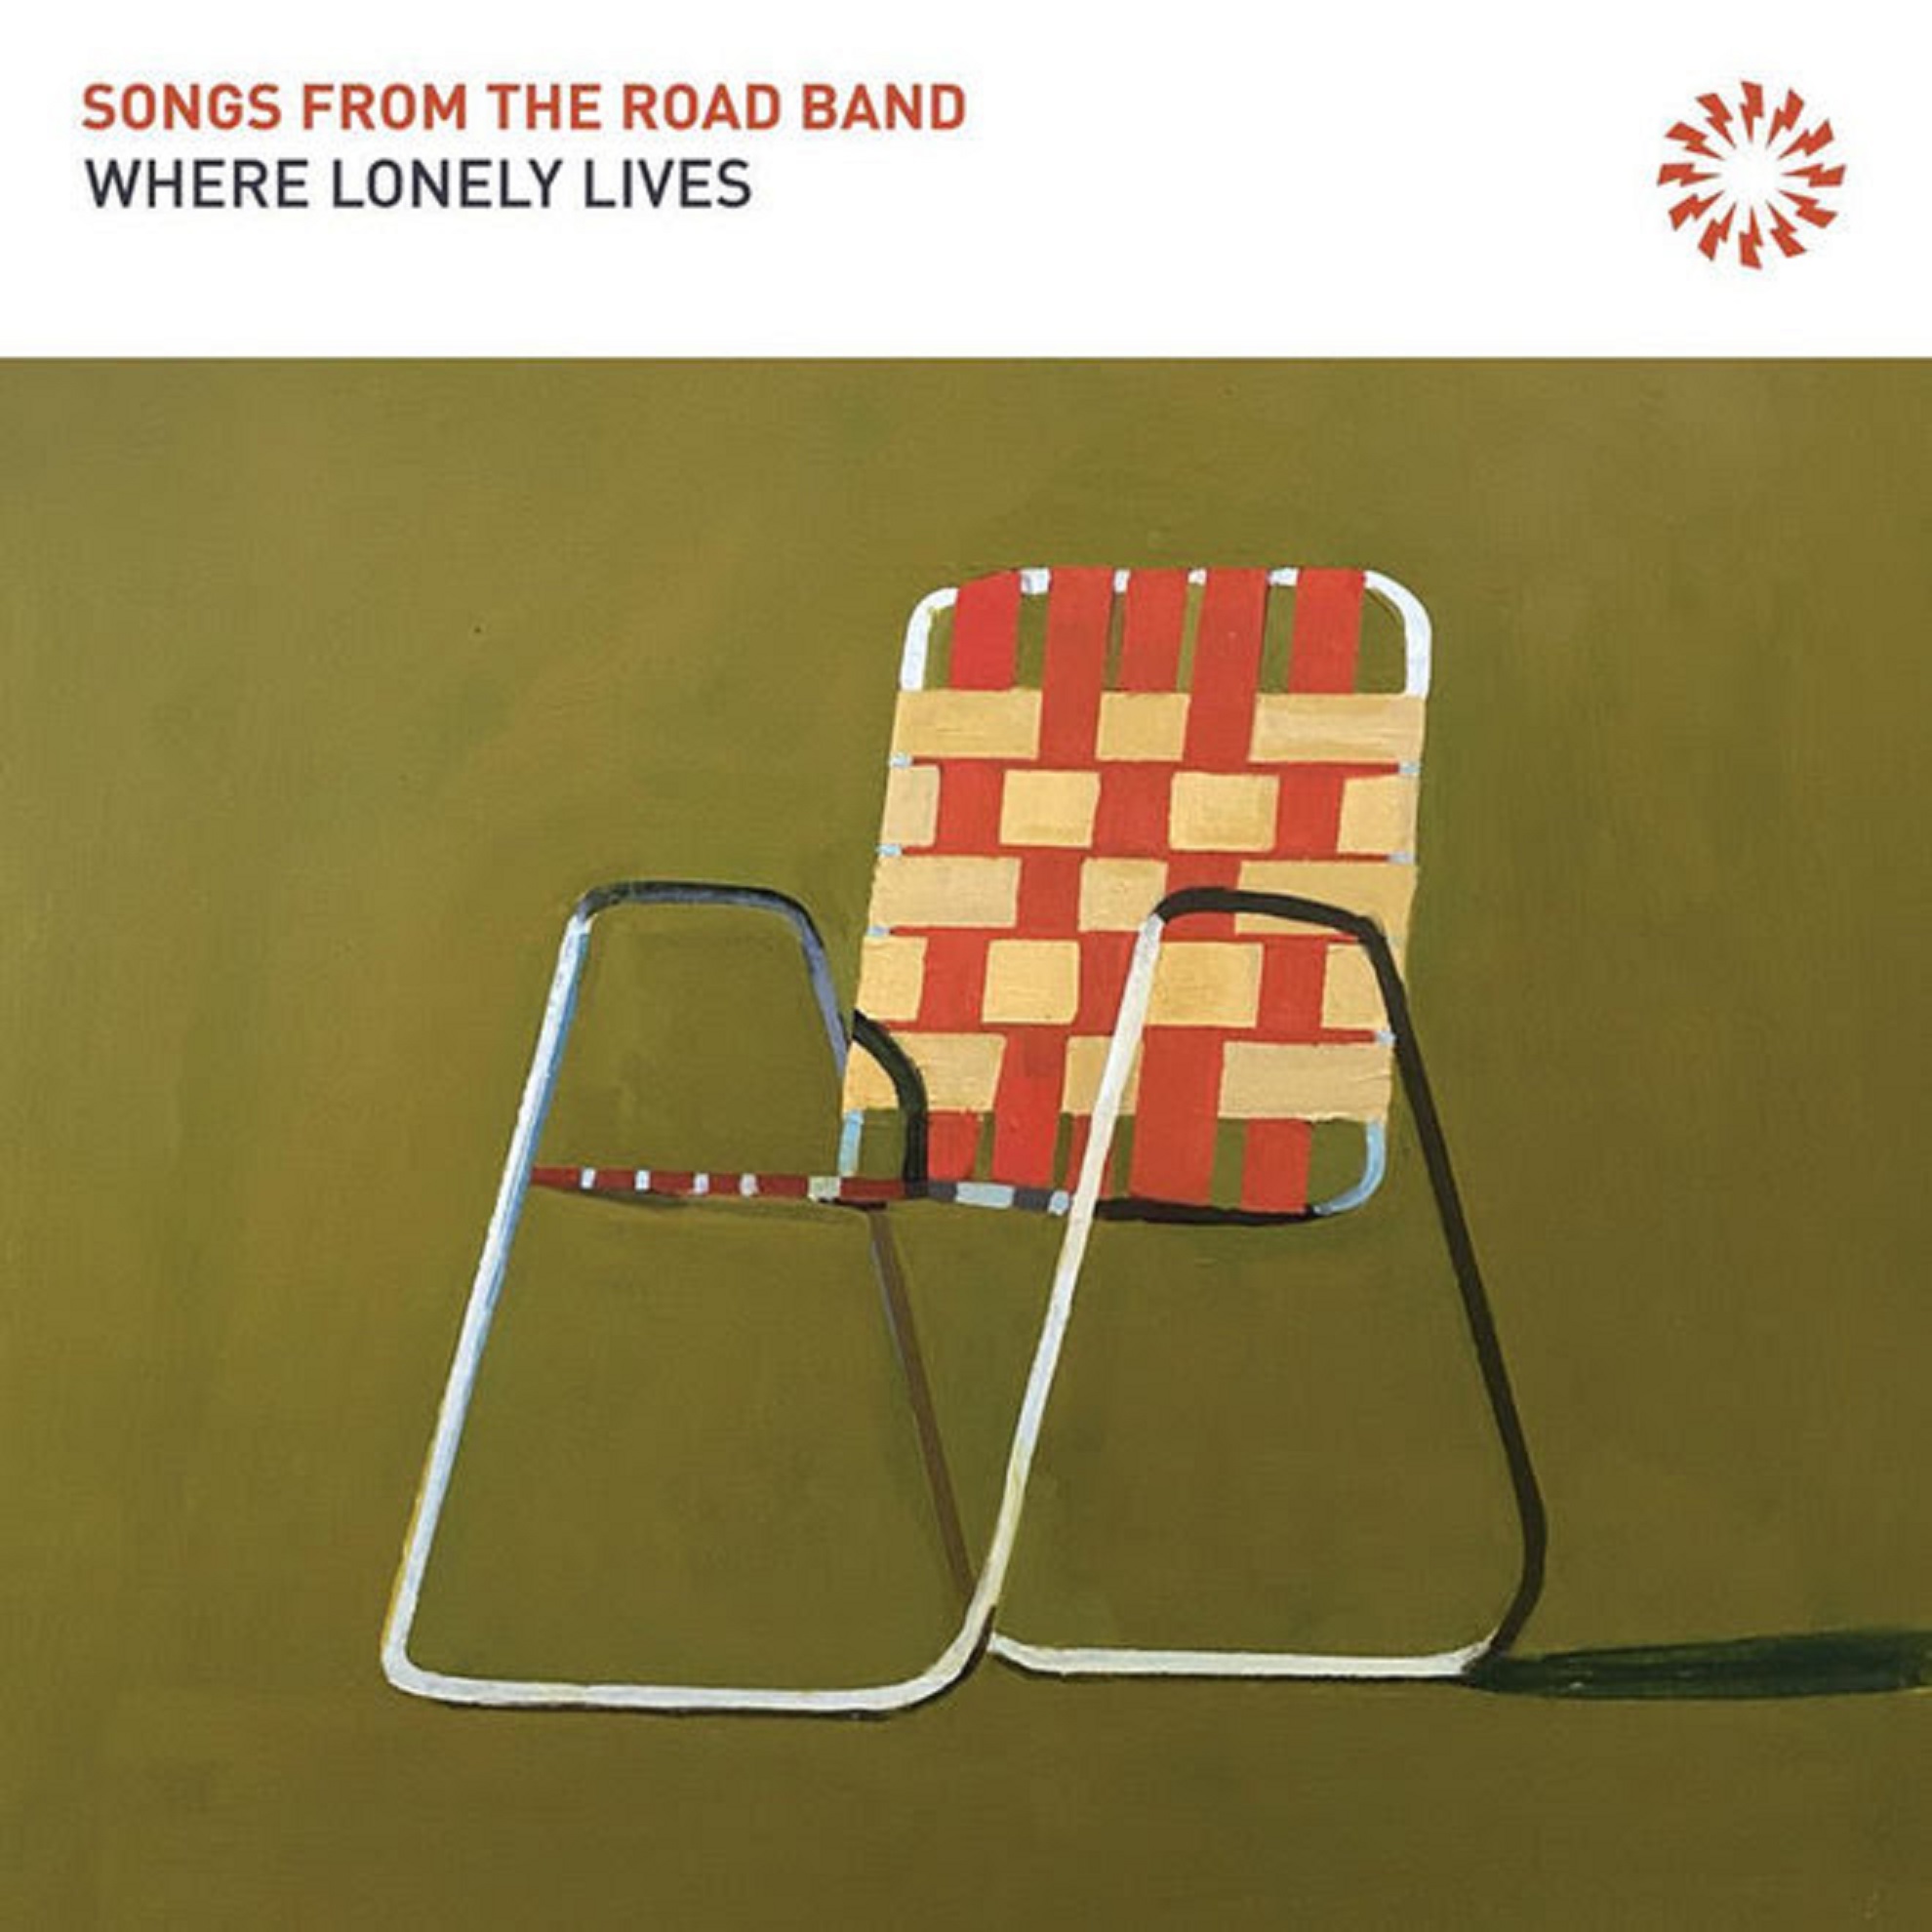 Songs From the Road Band Releases New Single